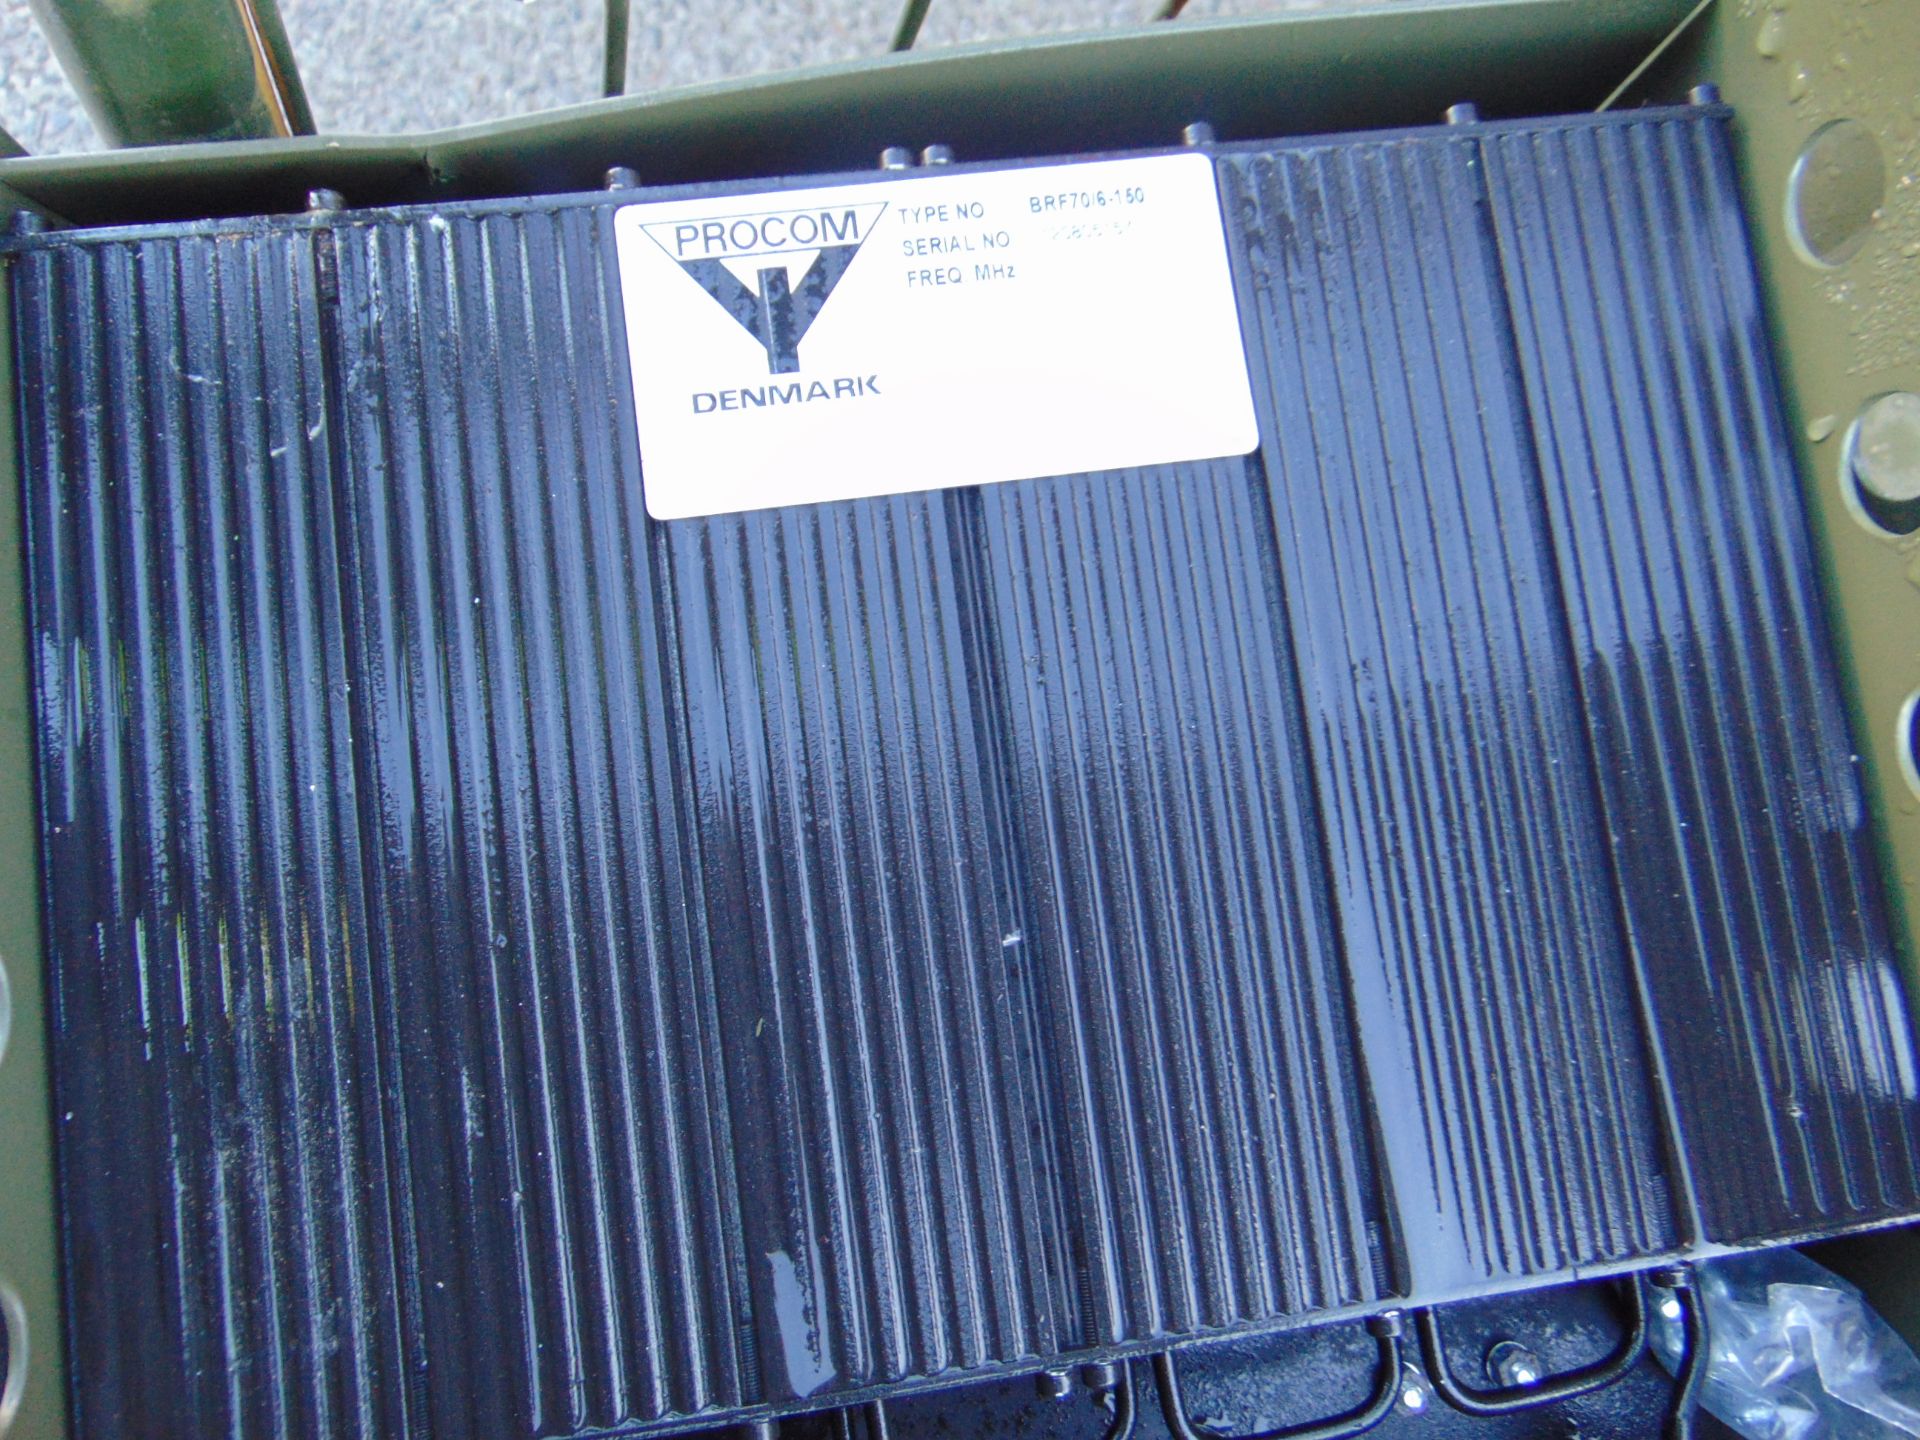 Approx 90 Unissued Procom Radio Filters c/w Frame and Leads - Image 4 of 4